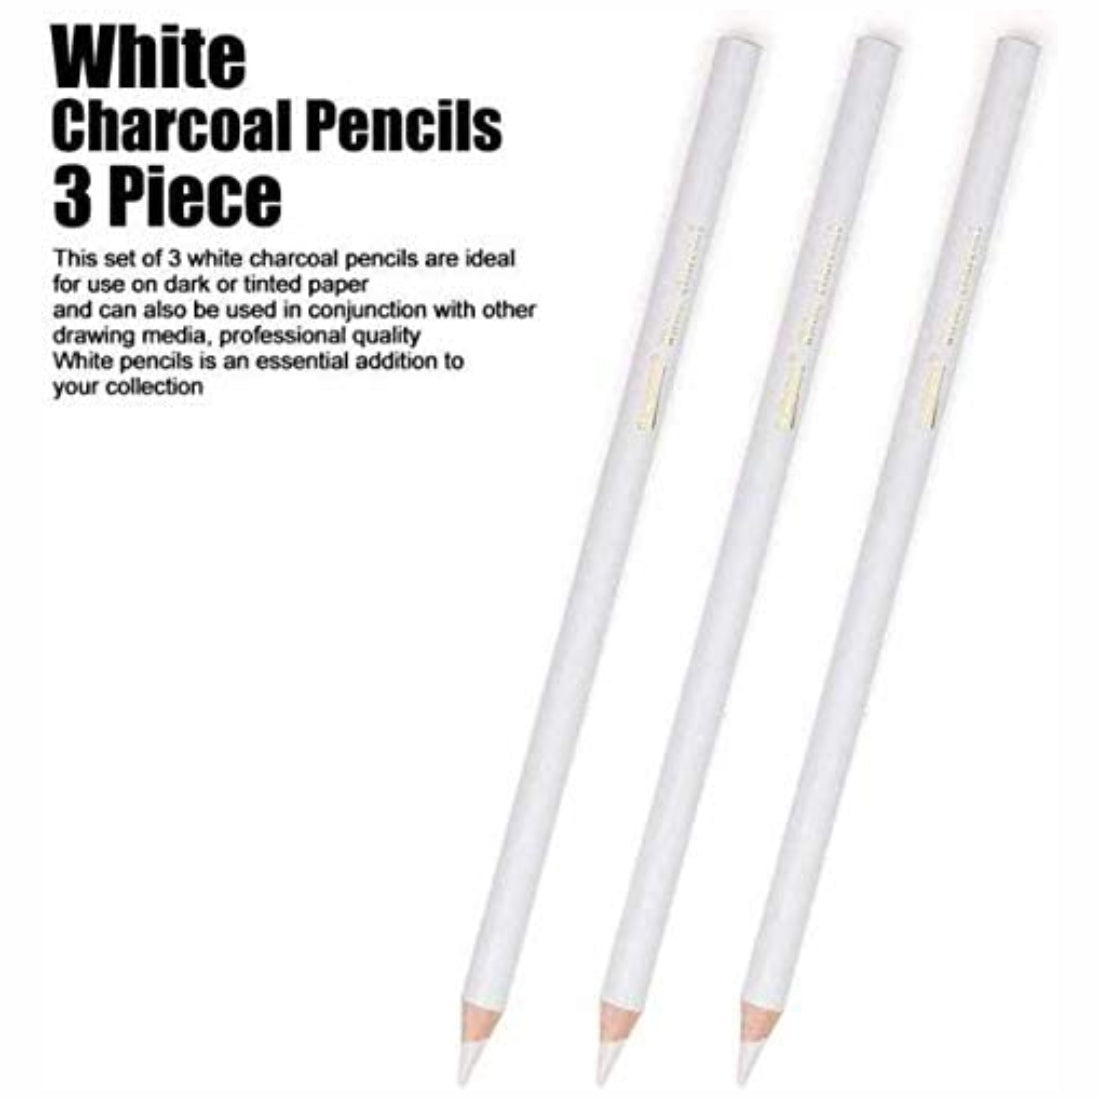 White Charcoal Pencils - Set of 3